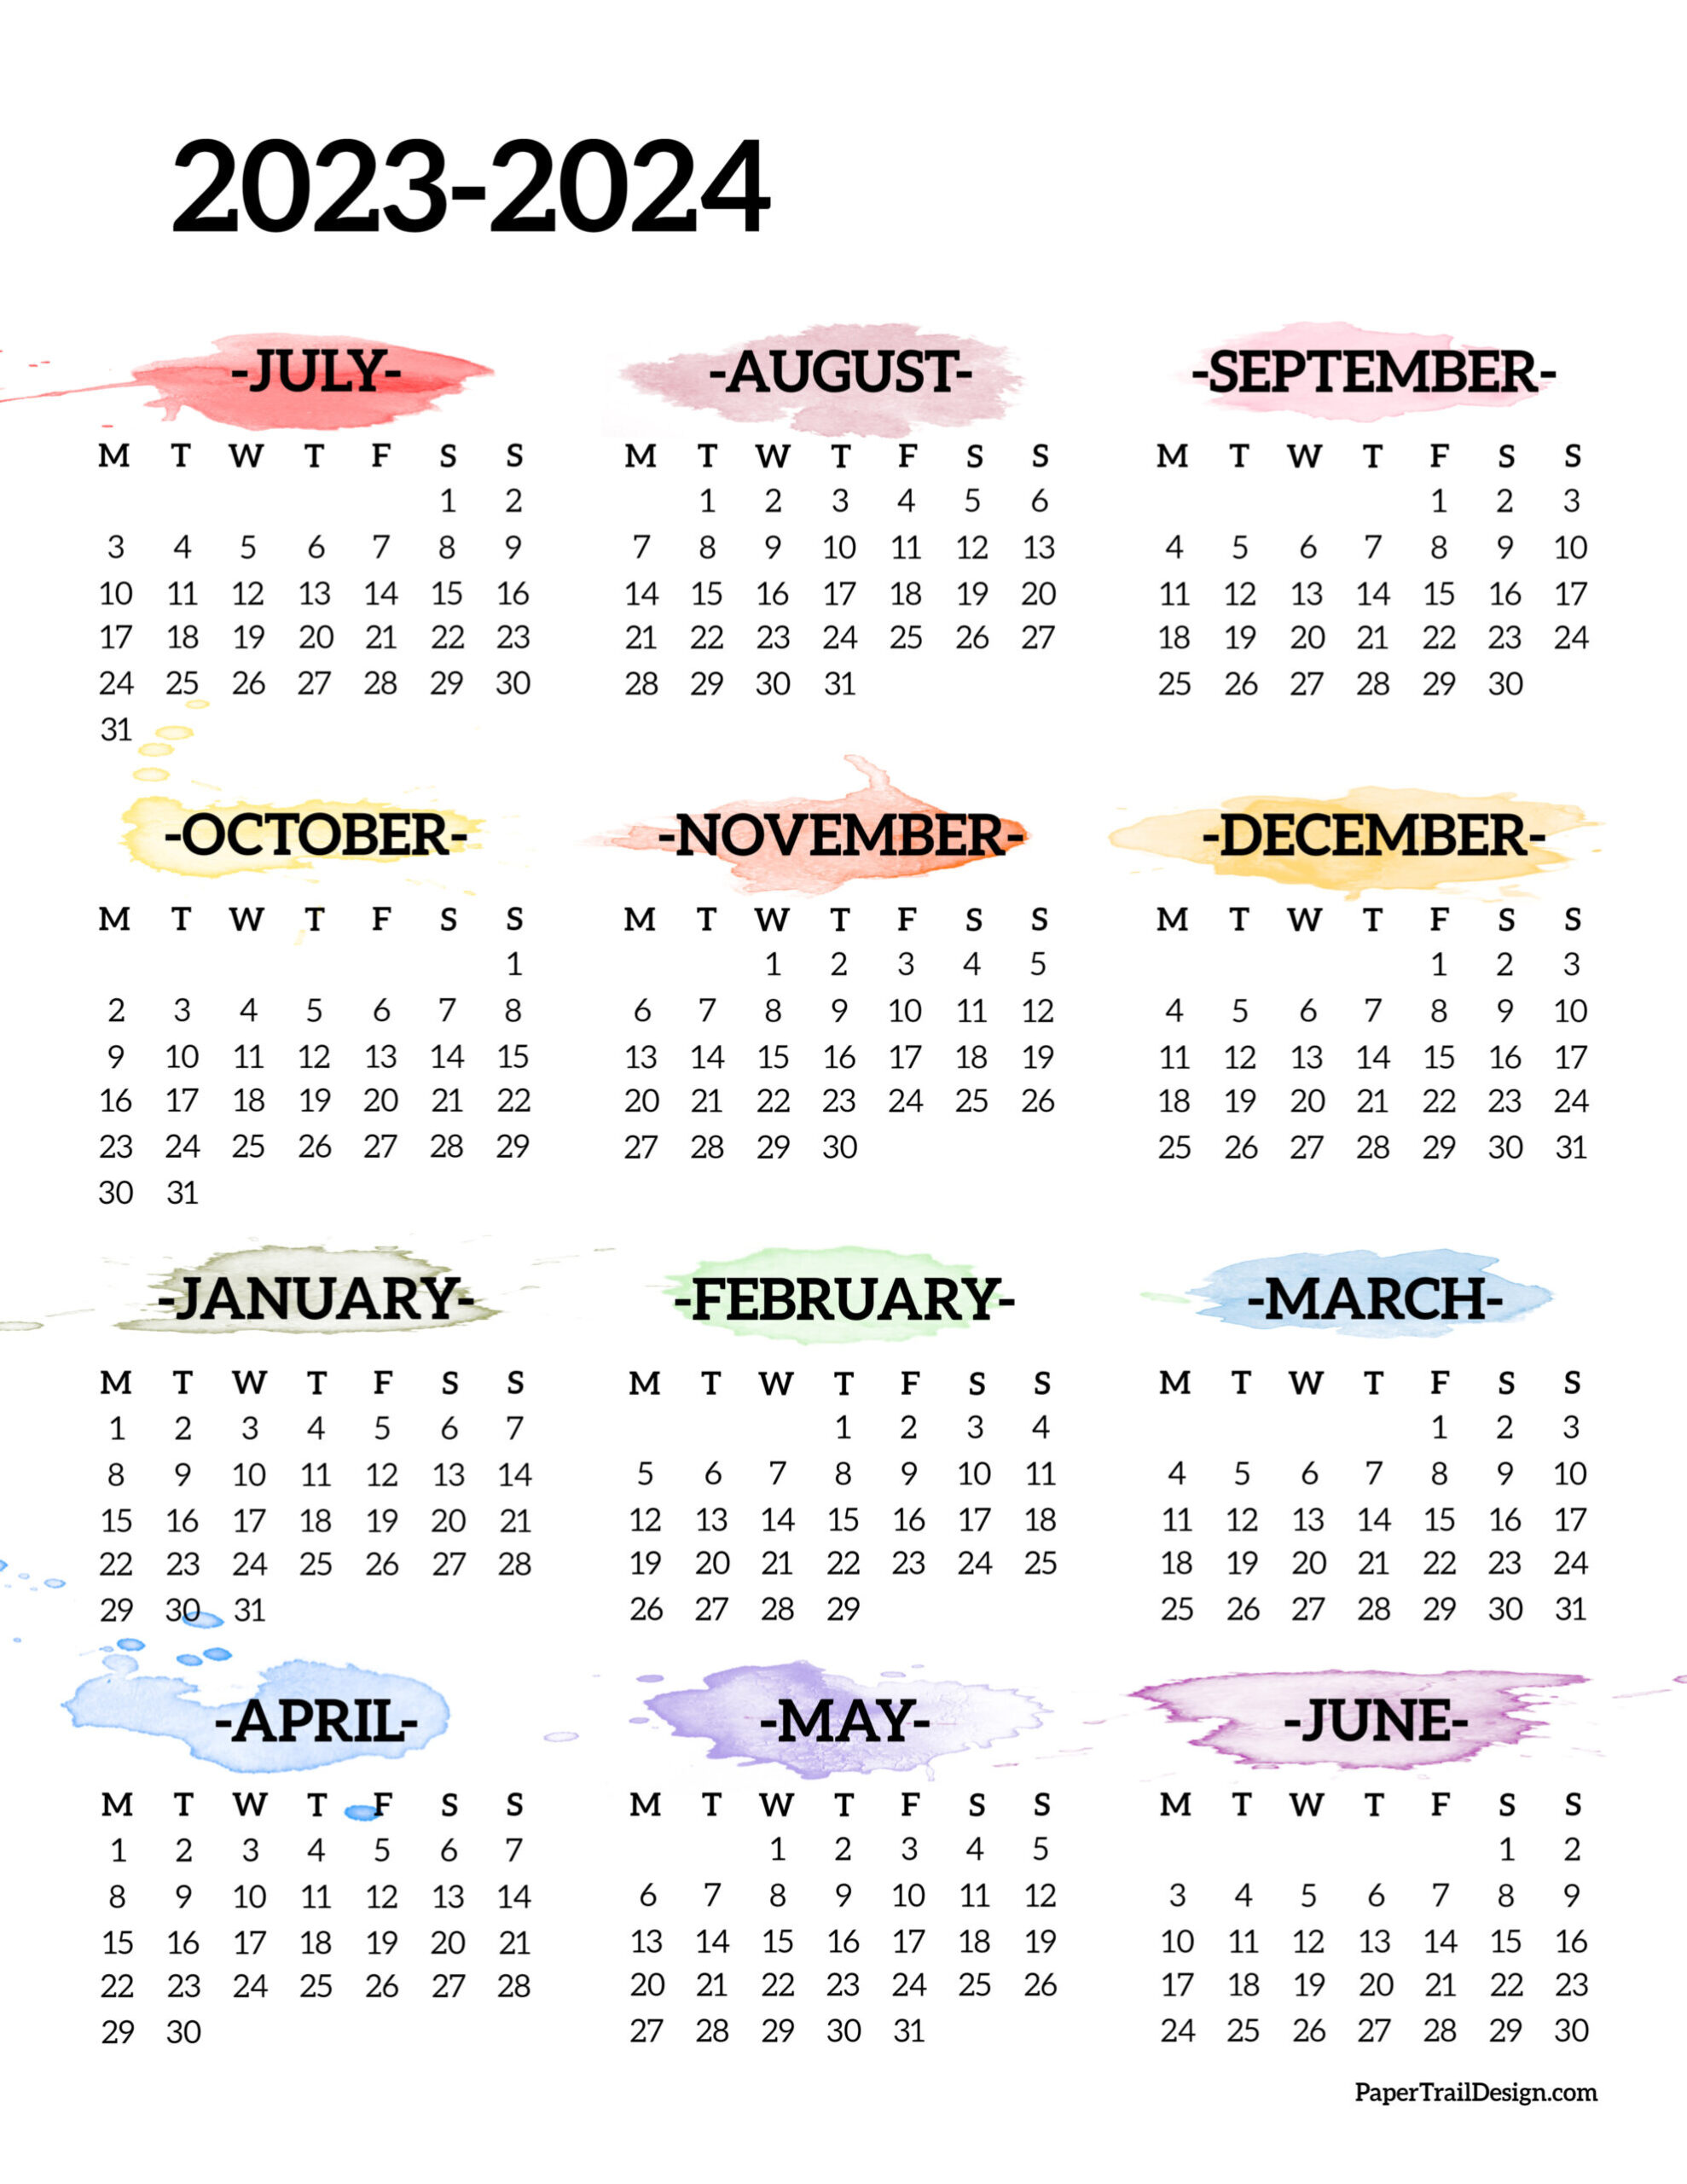 2023-2024 School Year Calendar Free Printable - Paper Trail Design within Calendar August 2023 - July 2024